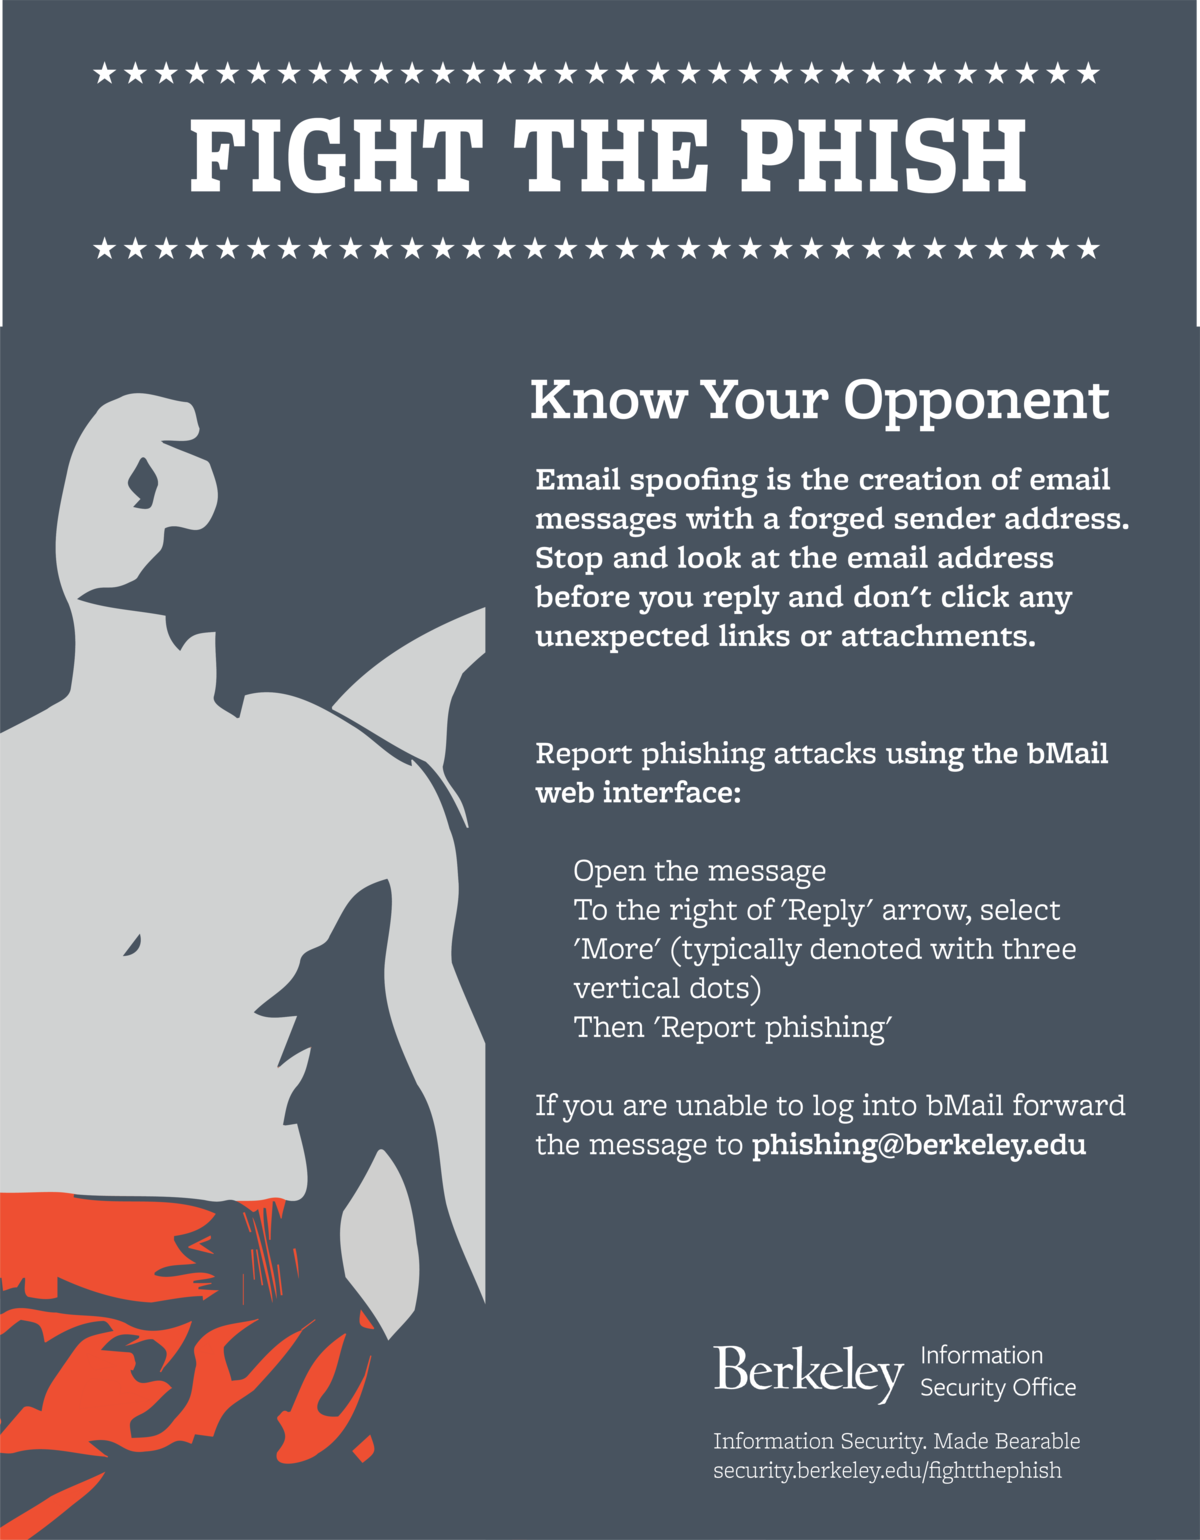 Know Your Opponent Flyer